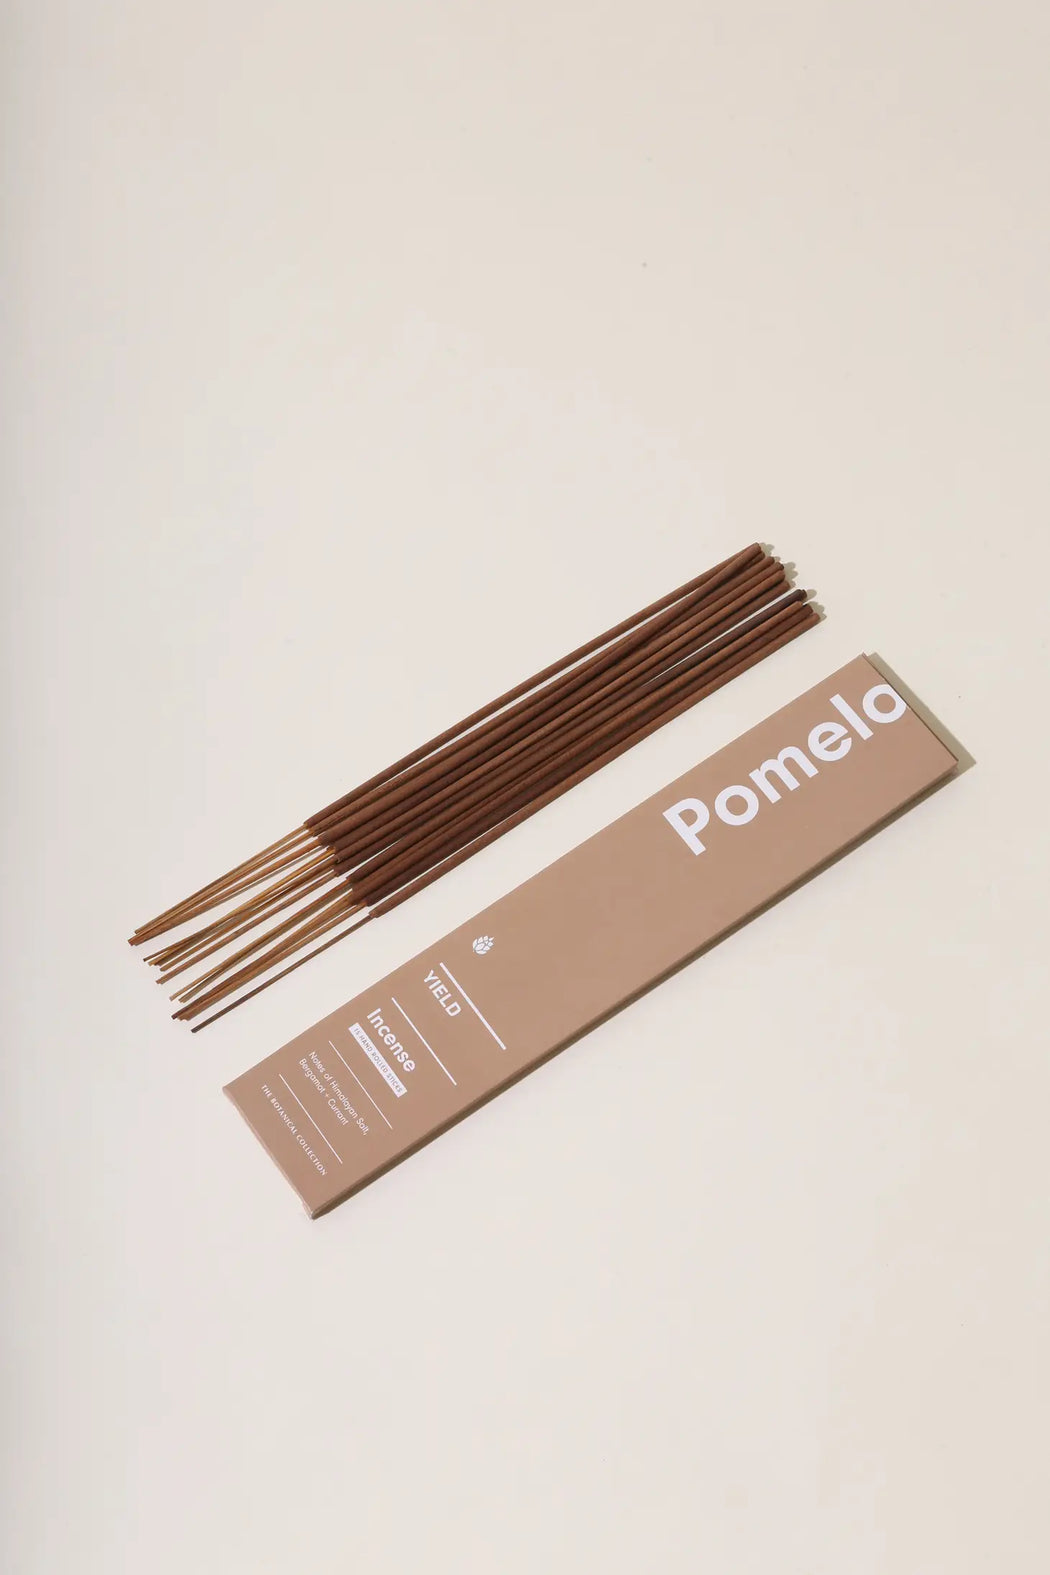 YIELD - Pomelo Incense